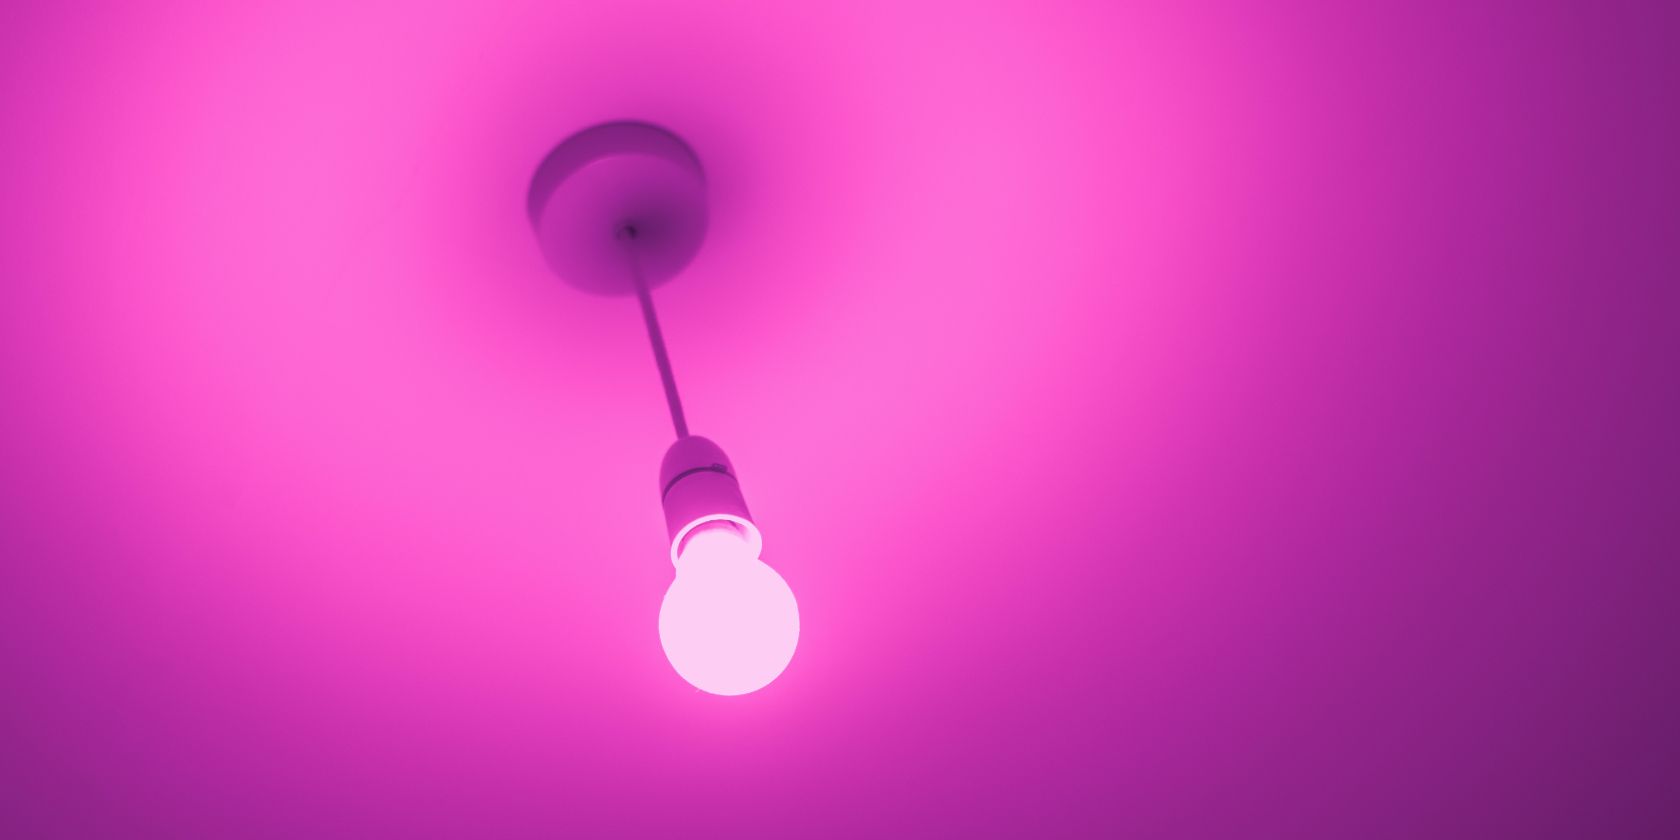 5 Problems With Philips Hue Bulbs and How to Fix Them